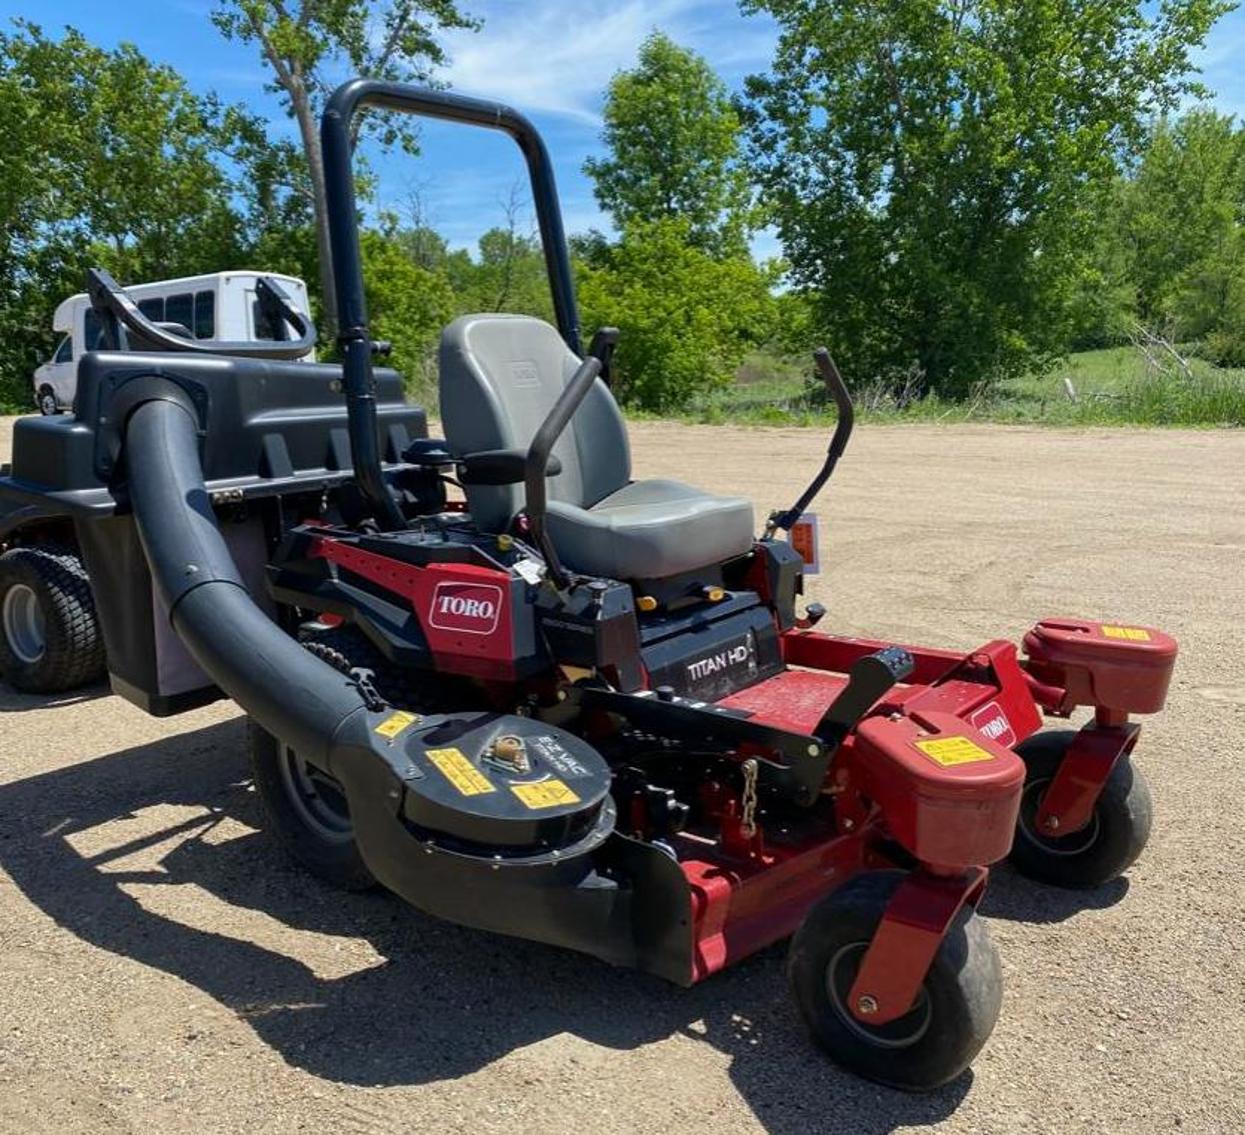 Northwoods Auction Co. Lawn Mower & Equipment Auction